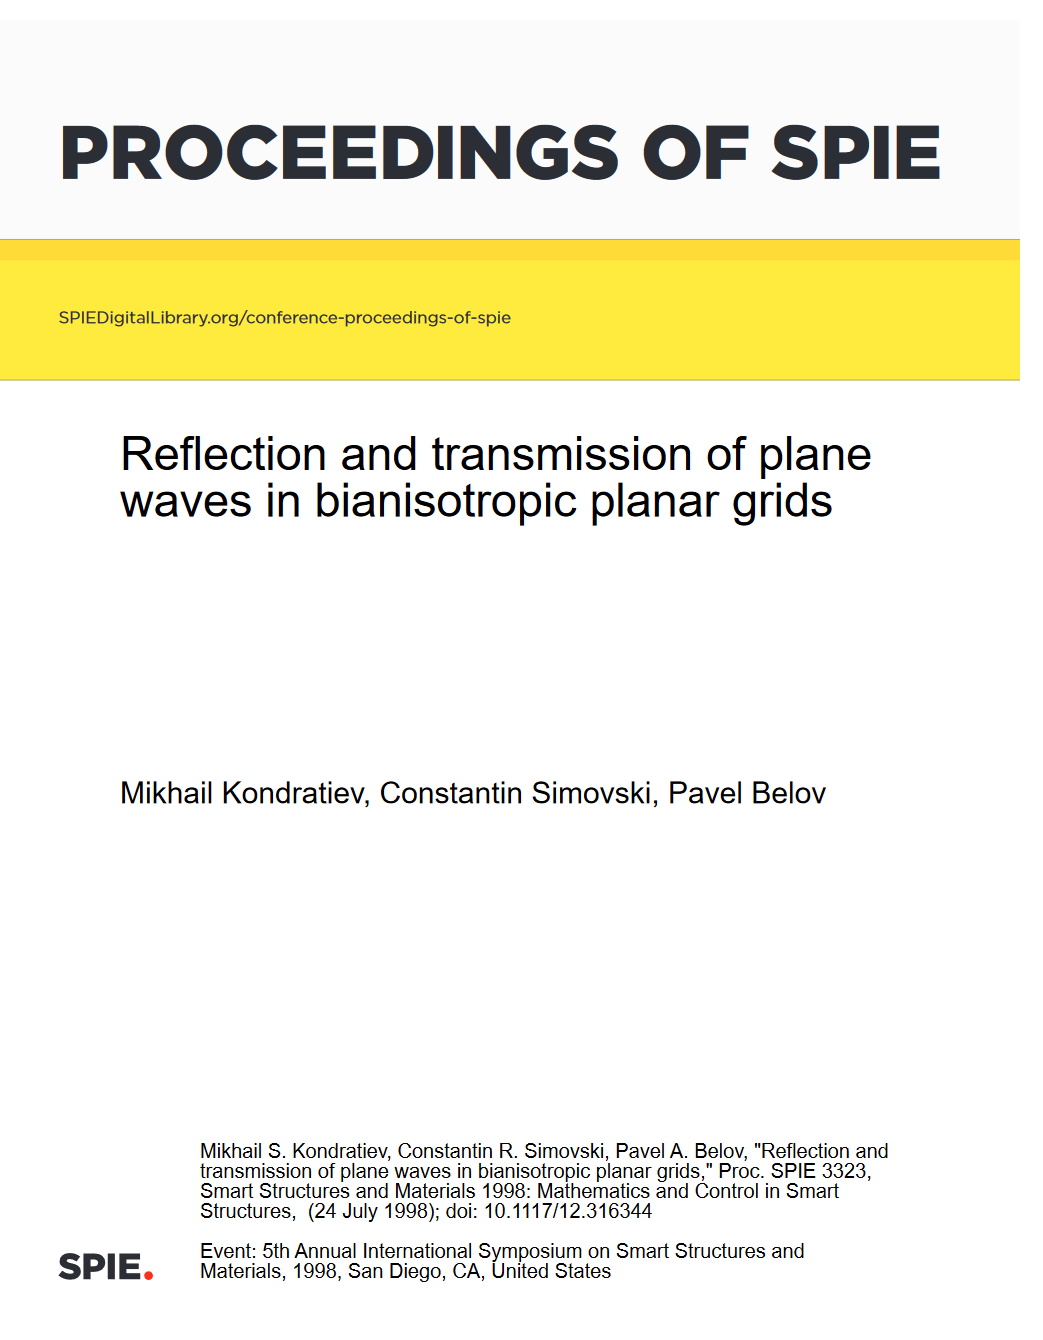 Reflection and transmission of plane waves in bianisotropic planar grids